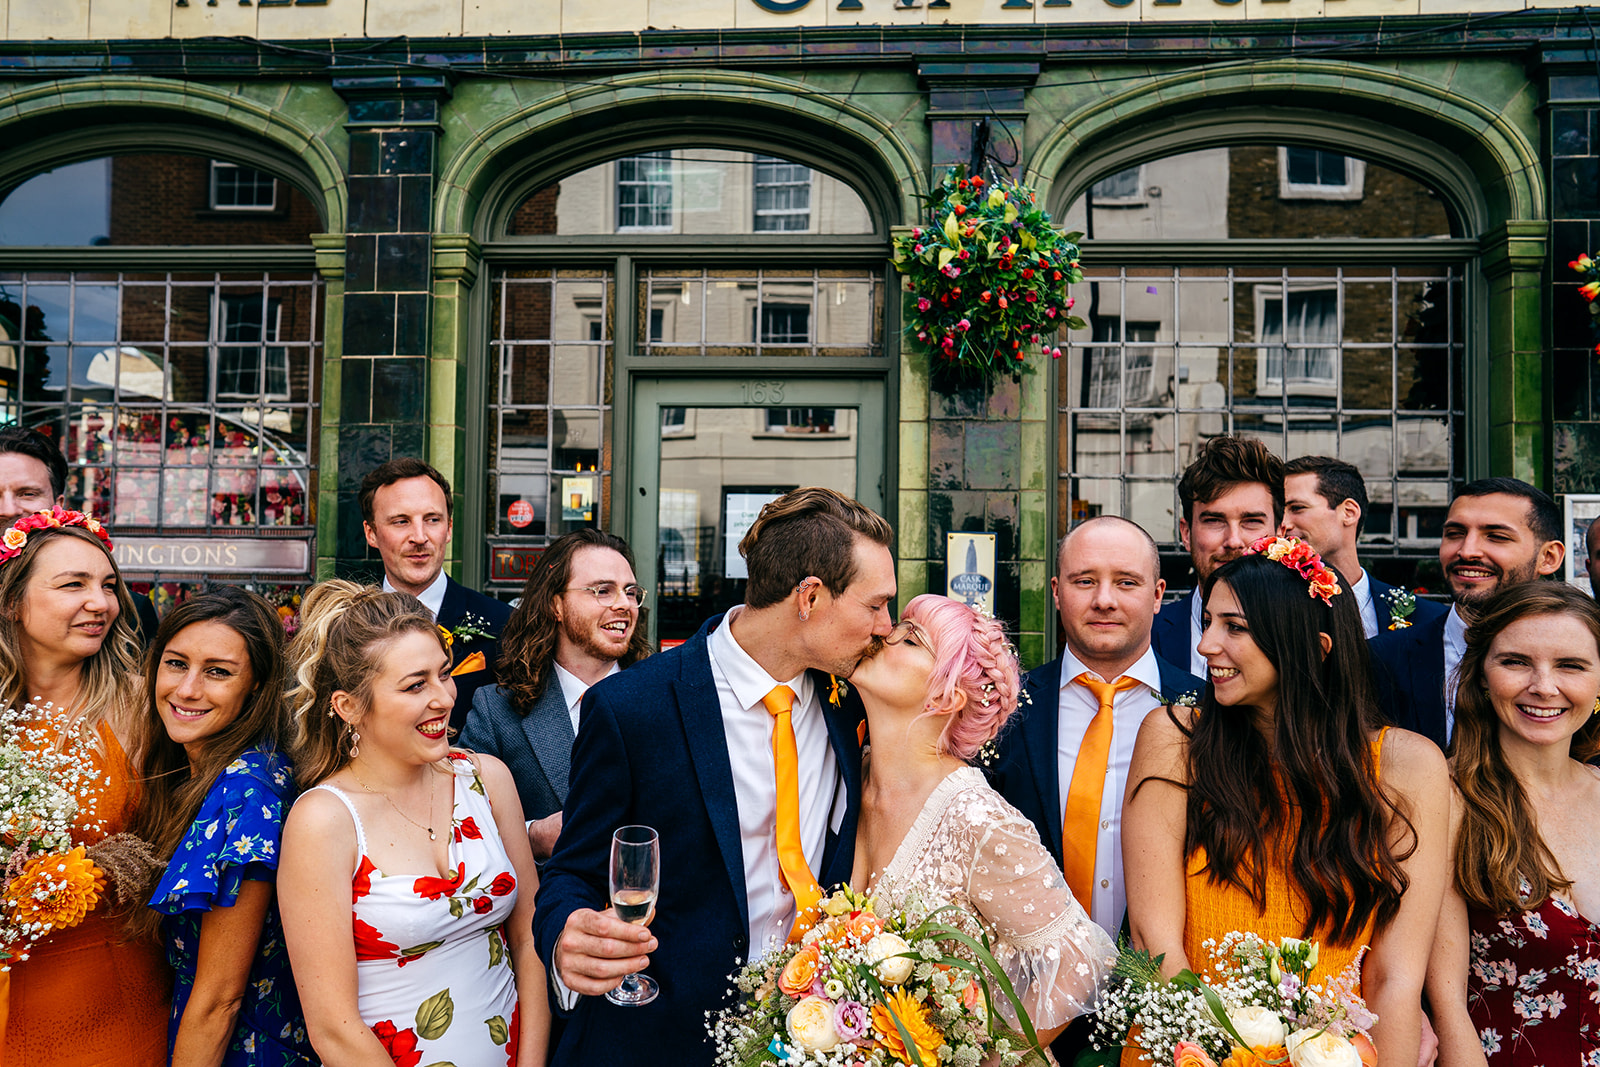 Couple kiss outside their London pub wedding surrounded by guests